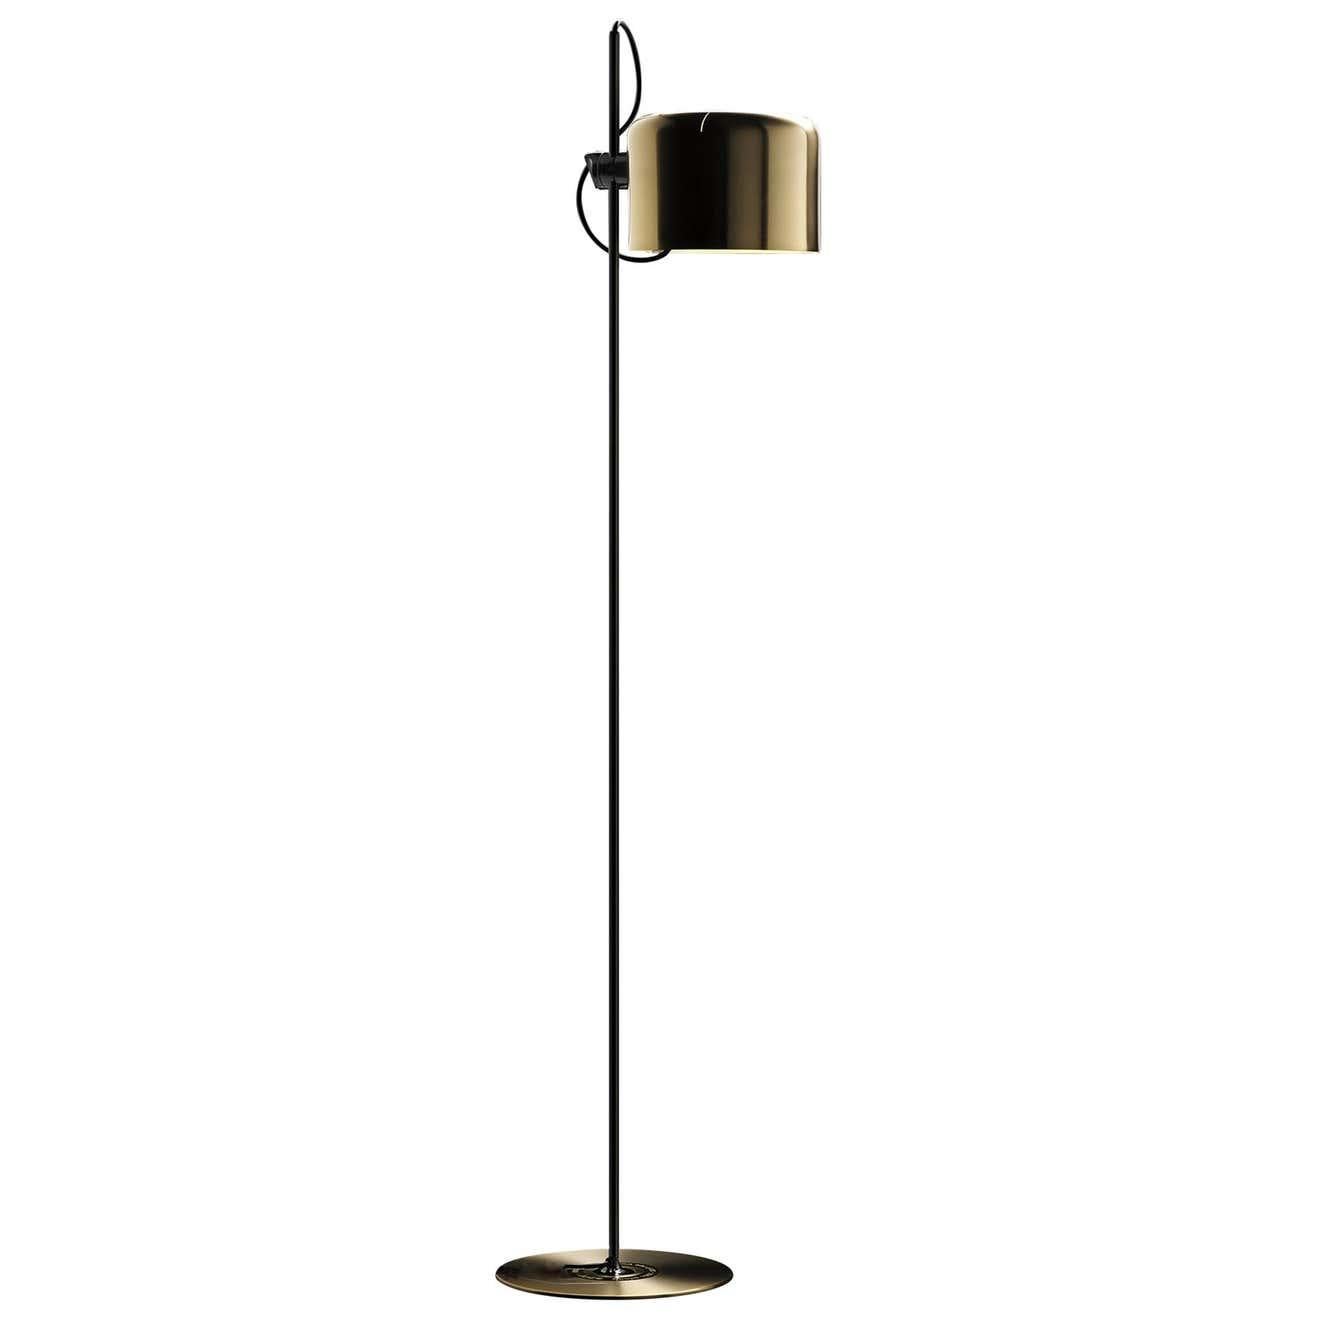 Joe Colombo Floor Lamp Limited Edition 'Coupé' Gold by Oluce In New Condition For Sale In Barcelona, Barcelona